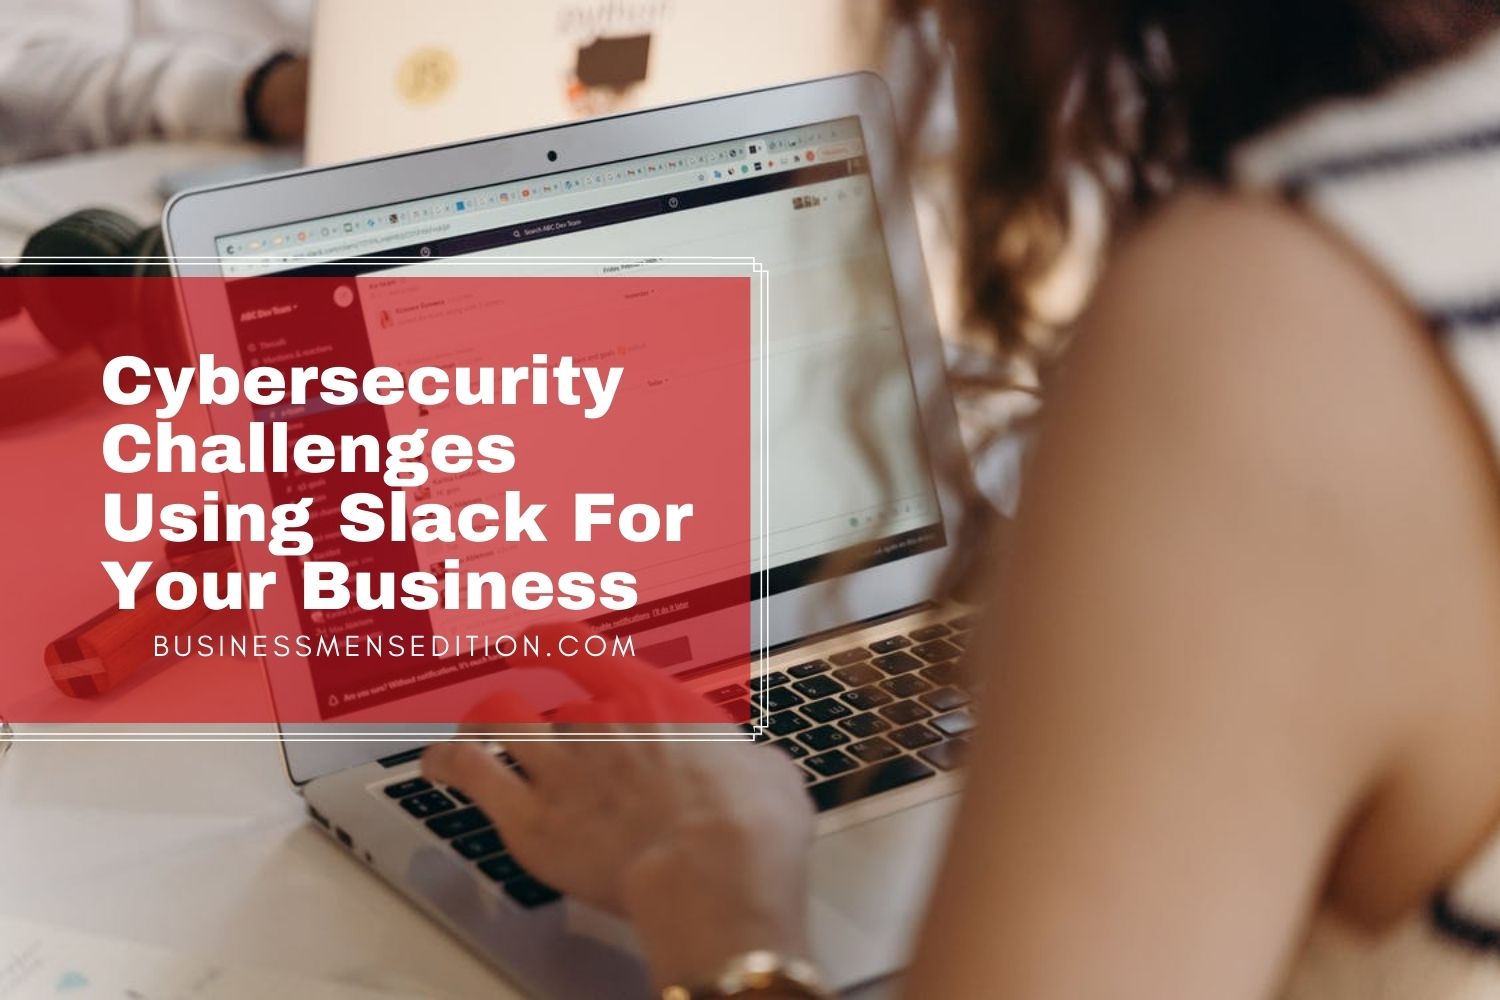 Cybersecurity-in-Businesses-using-slack